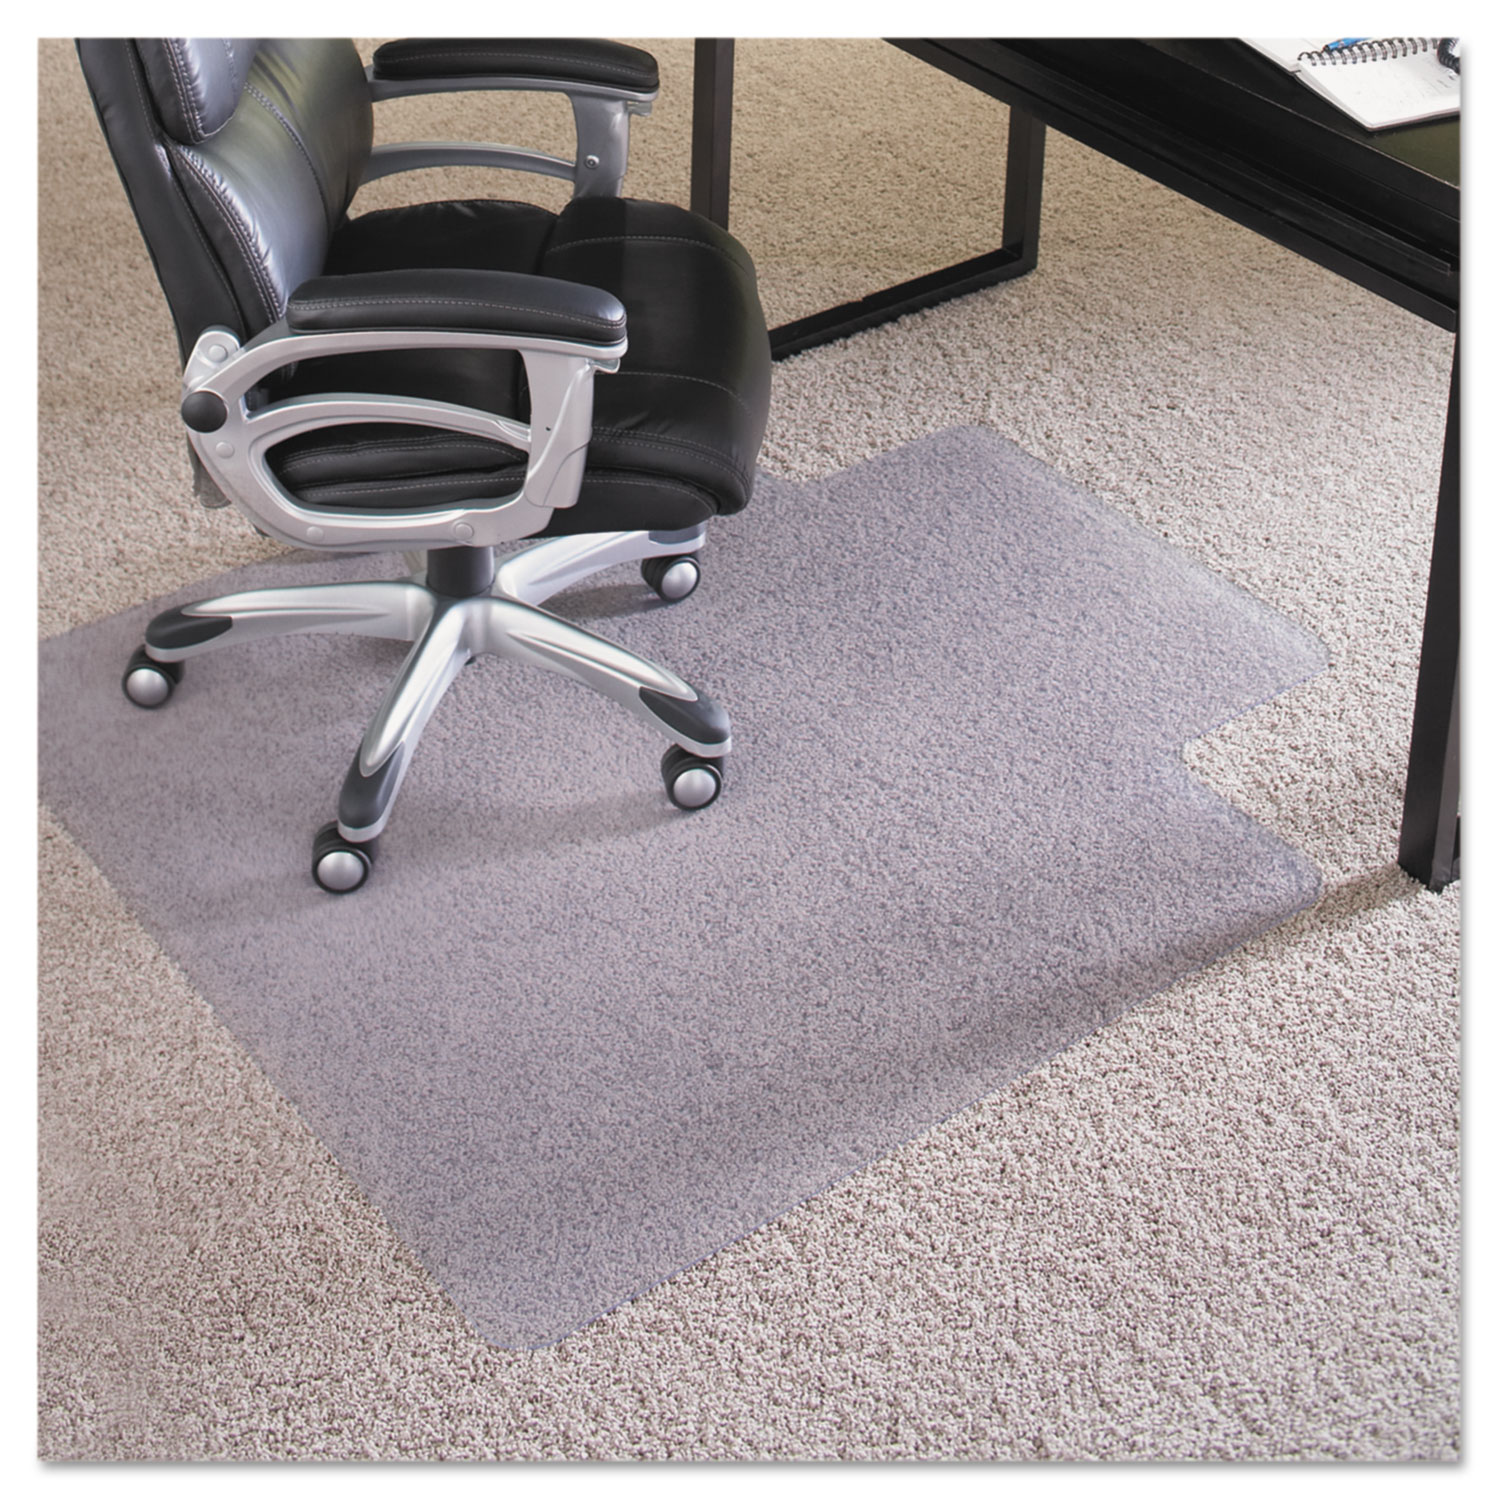 45x53 Lip Chair Mat, Performance Series AnchorBar for Carpet up to 1